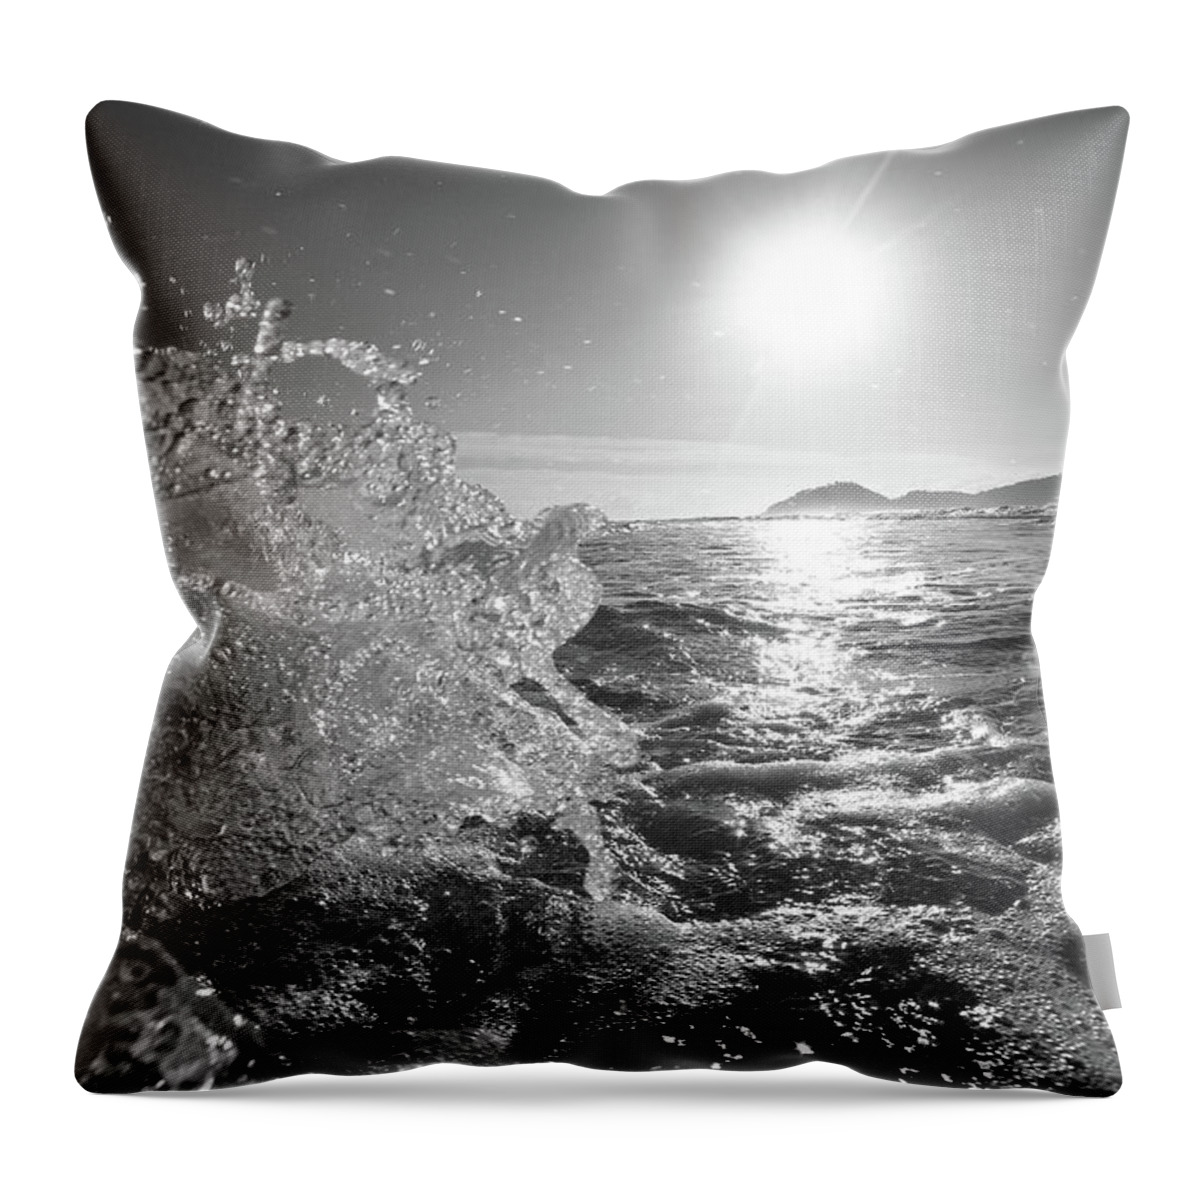 Curve Throw Pillow featuring the photograph Powerful Wave At Dawn by Gustavosilent